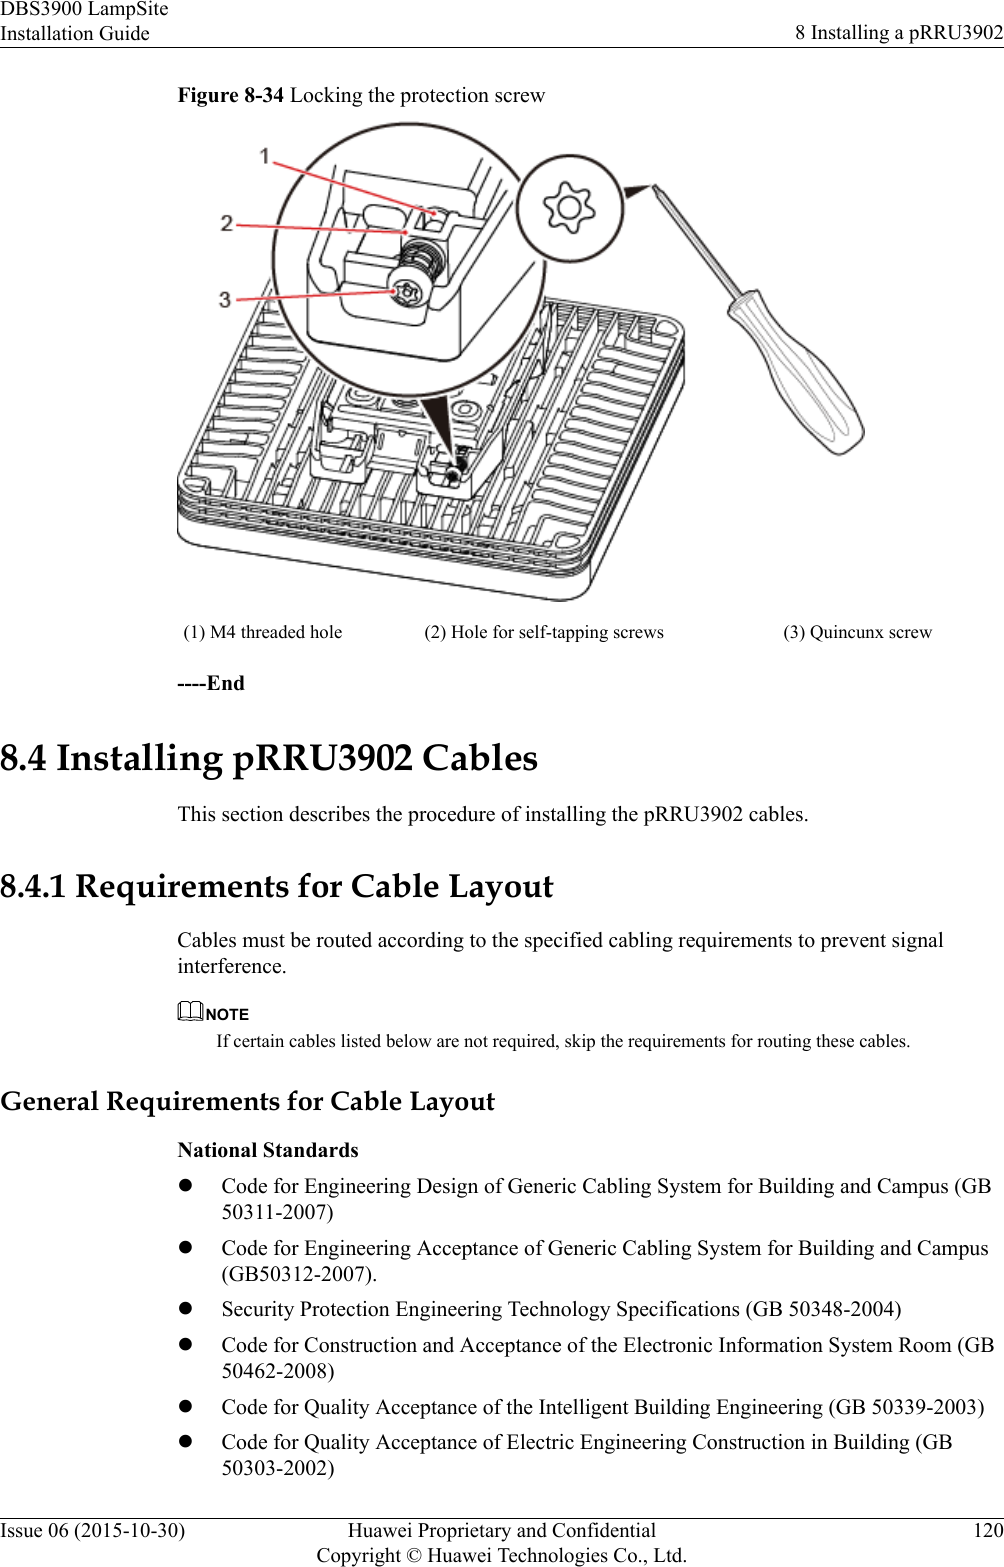 Figure 8-34 Locking the protection screw(1) M4 threaded hole (2) Hole for self-tapping screws (3) Quincunx screw----End8.4 Installing pRRU3902 CablesThis section describes the procedure of installing the pRRU3902 cables.8.4.1 Requirements for Cable LayoutCables must be routed according to the specified cabling requirements to prevent signalinterference.NOTEIf certain cables listed below are not required, skip the requirements for routing these cables.General Requirements for Cable LayoutNational StandardslCode for Engineering Design of Generic Cabling System for Building and Campus (GB50311-2007)lCode for Engineering Acceptance of Generic Cabling System for Building and Campus(GB50312-2007).lSecurity Protection Engineering Technology Specifications (GB 50348-2004)lCode for Construction and Acceptance of the Electronic Information System Room (GB50462-2008)lCode for Quality Acceptance of the Intelligent Building Engineering (GB 50339-2003)lCode for Quality Acceptance of Electric Engineering Construction in Building (GB50303-2002)DBS3900 LampSiteInstallation Guide 8 Installing a pRRU3902Issue 06 (2015-10-30) Huawei Proprietary and ConfidentialCopyright © Huawei Technologies Co., Ltd.120